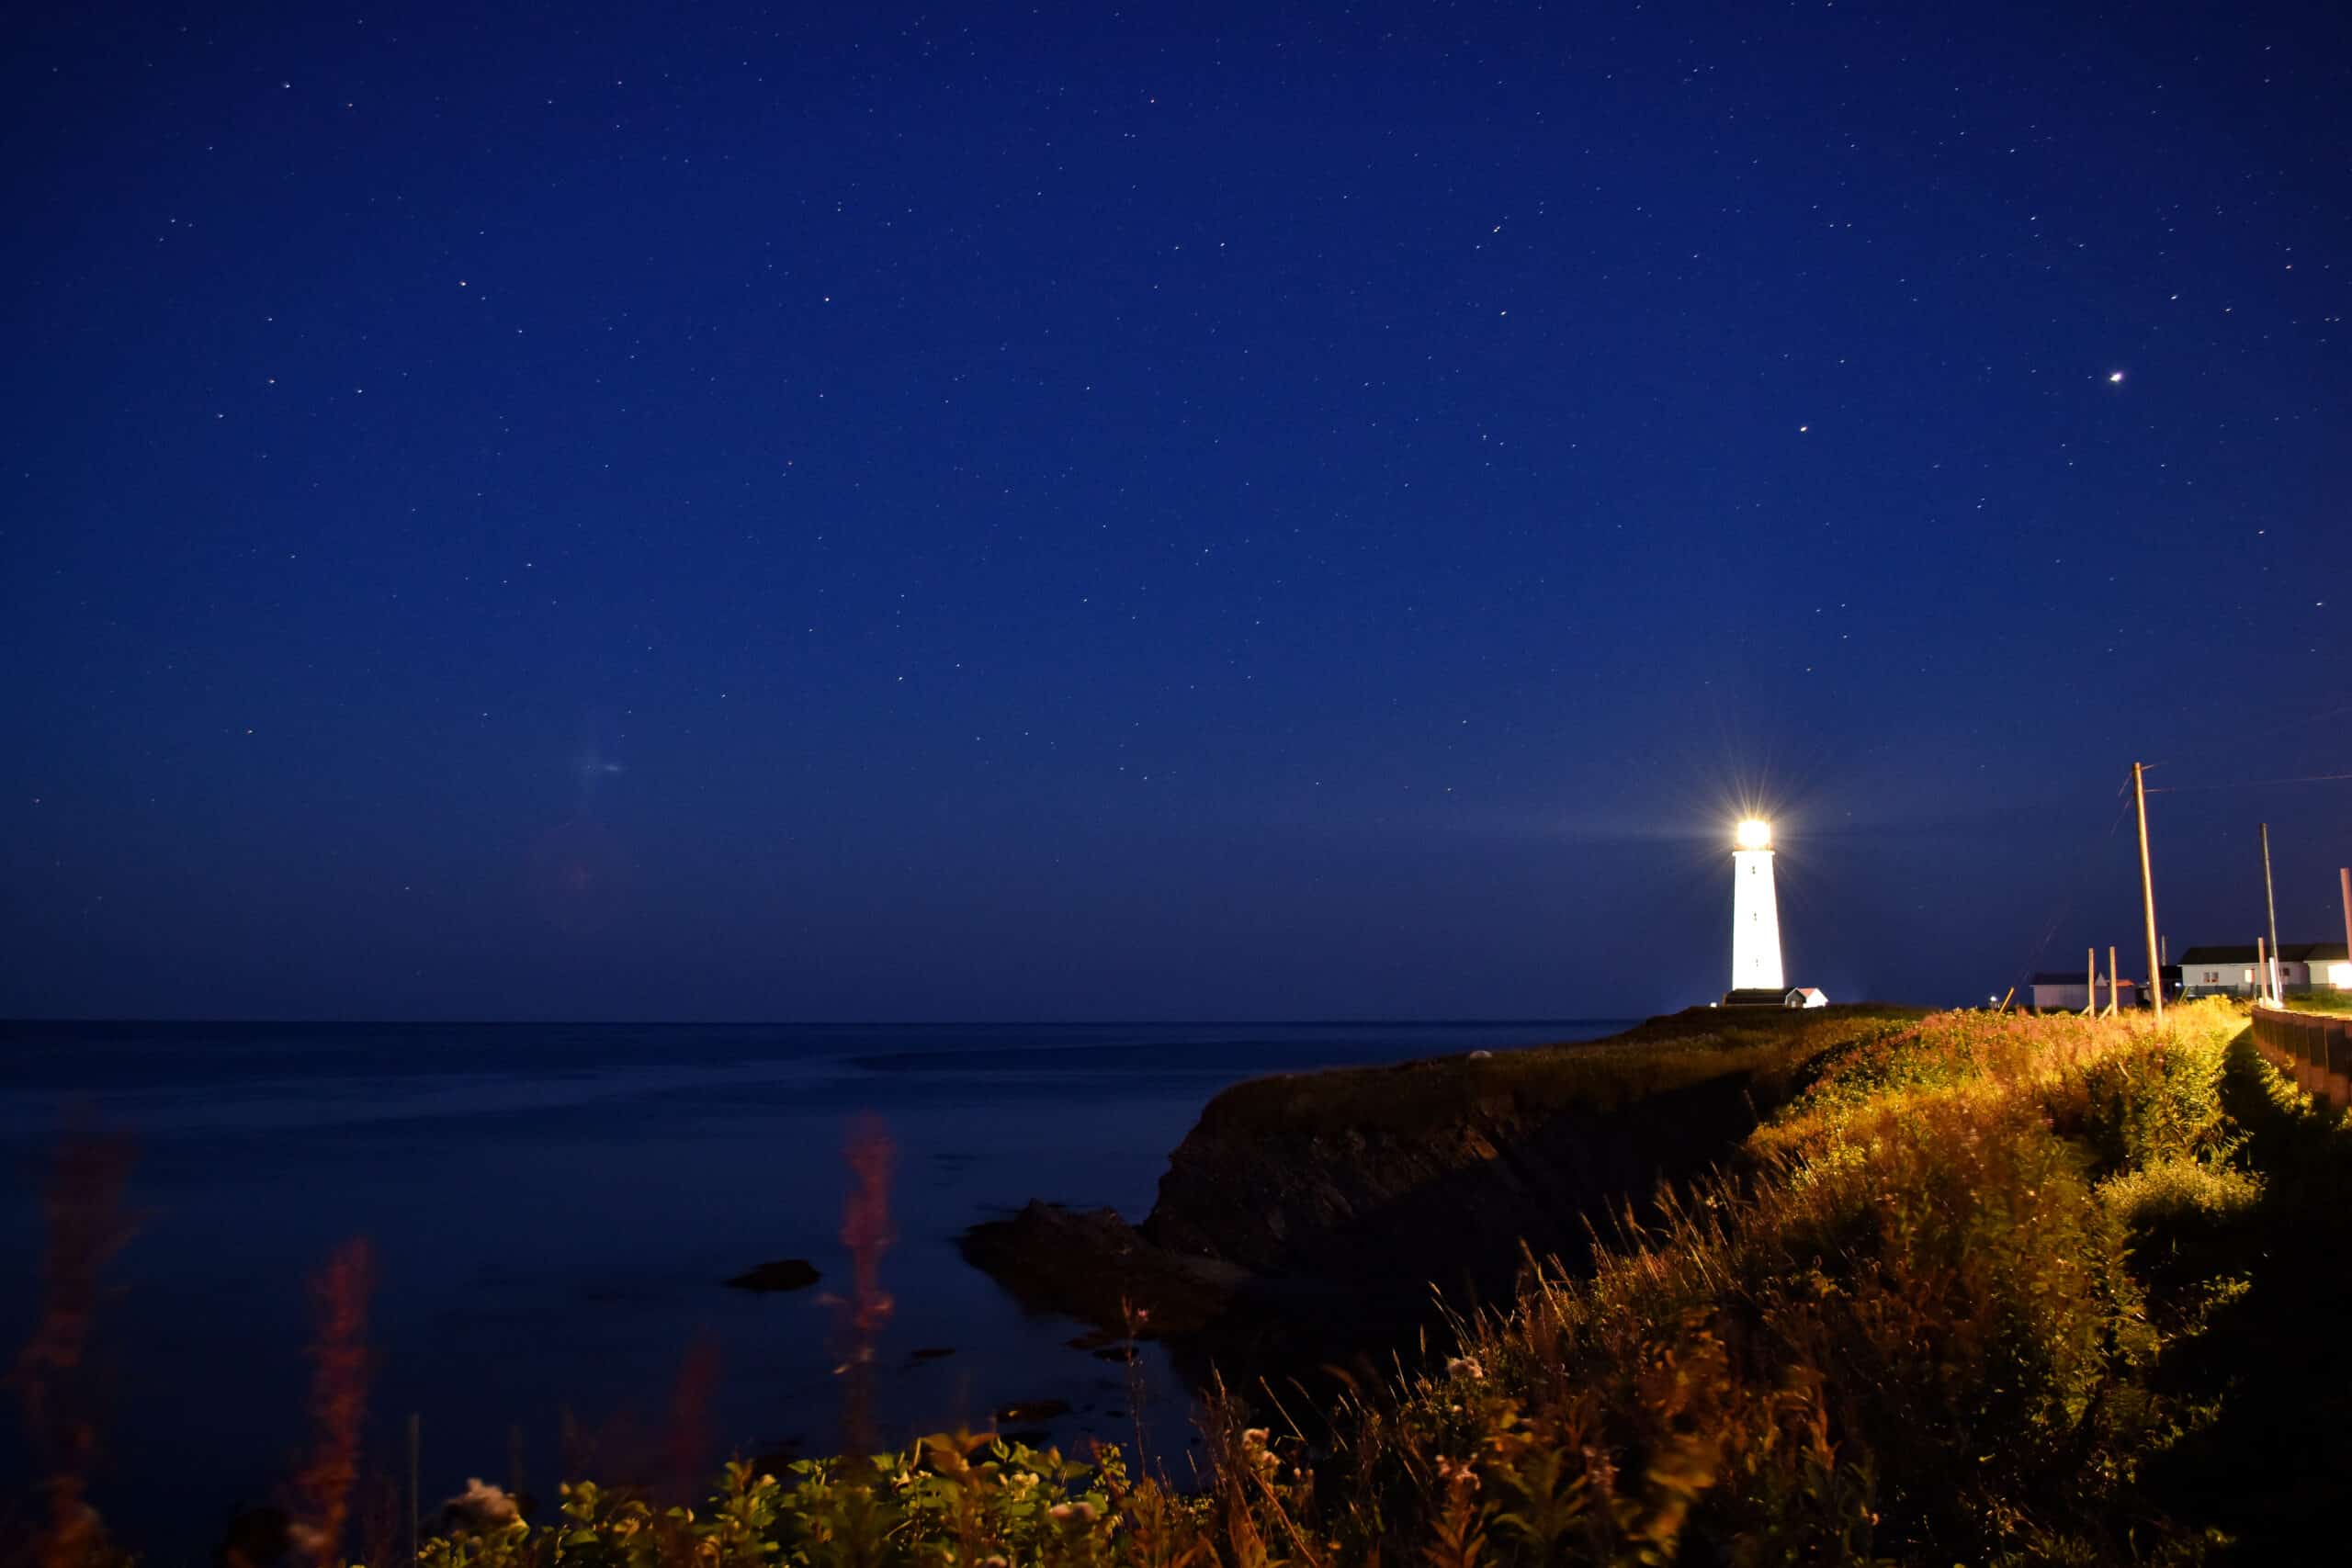 cap des rosiers lighthouse starry night